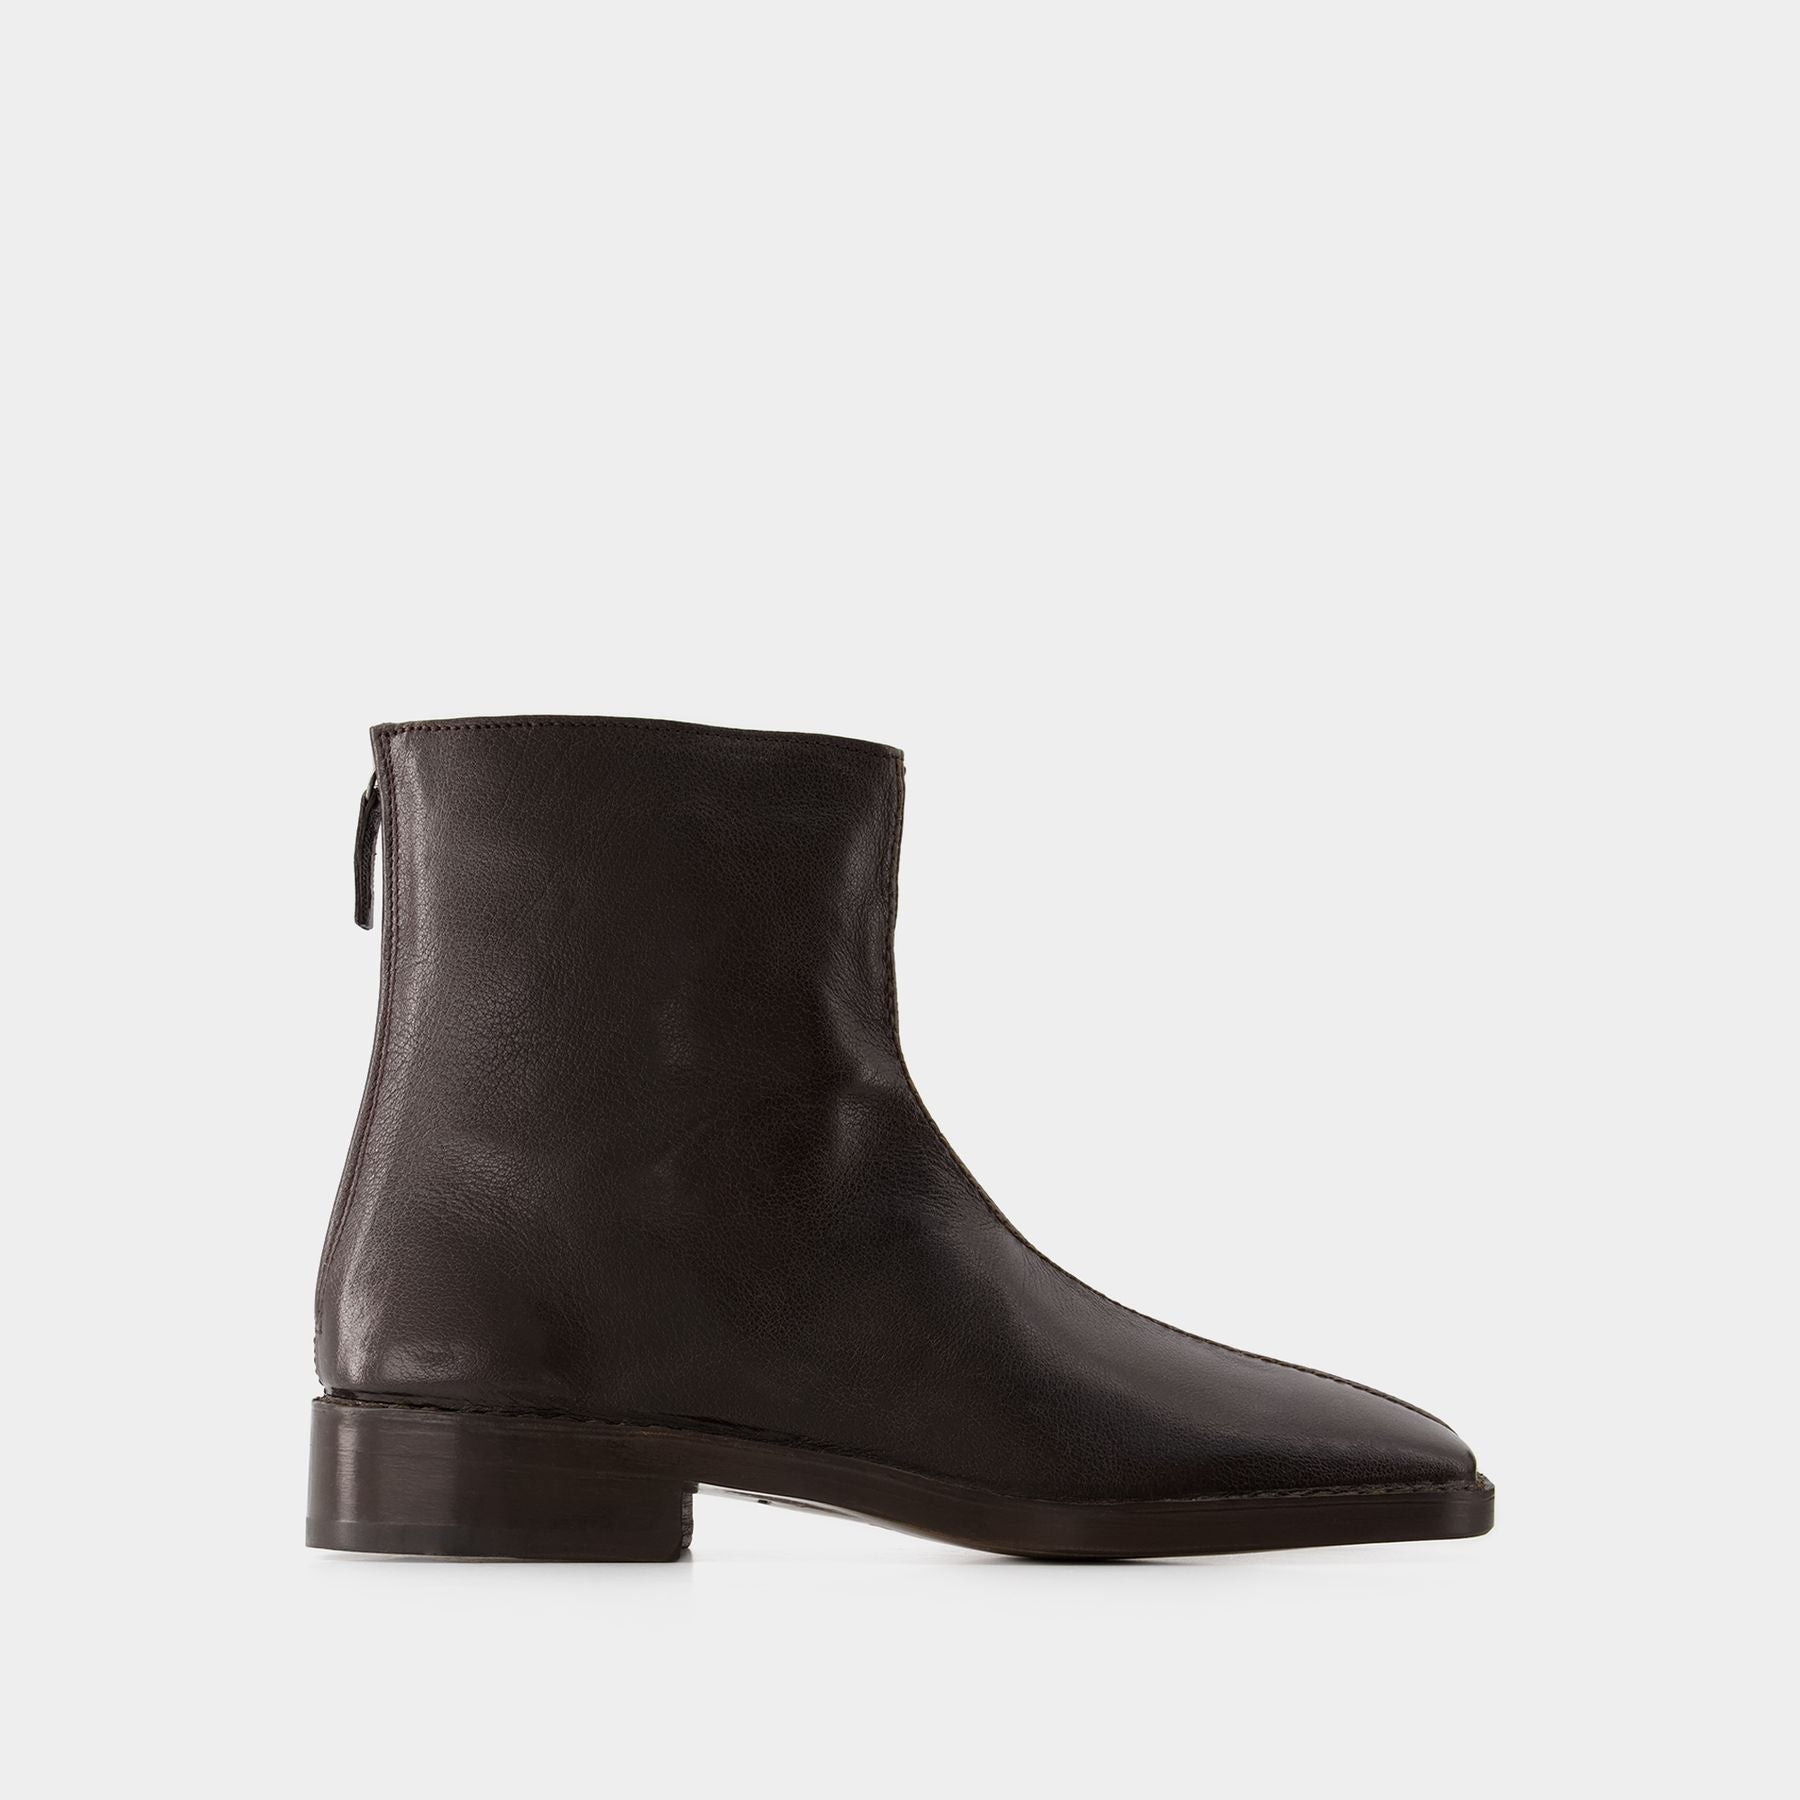 Lemaire ヒールブーツ ZIPPED BOOT 41 - ブーツ